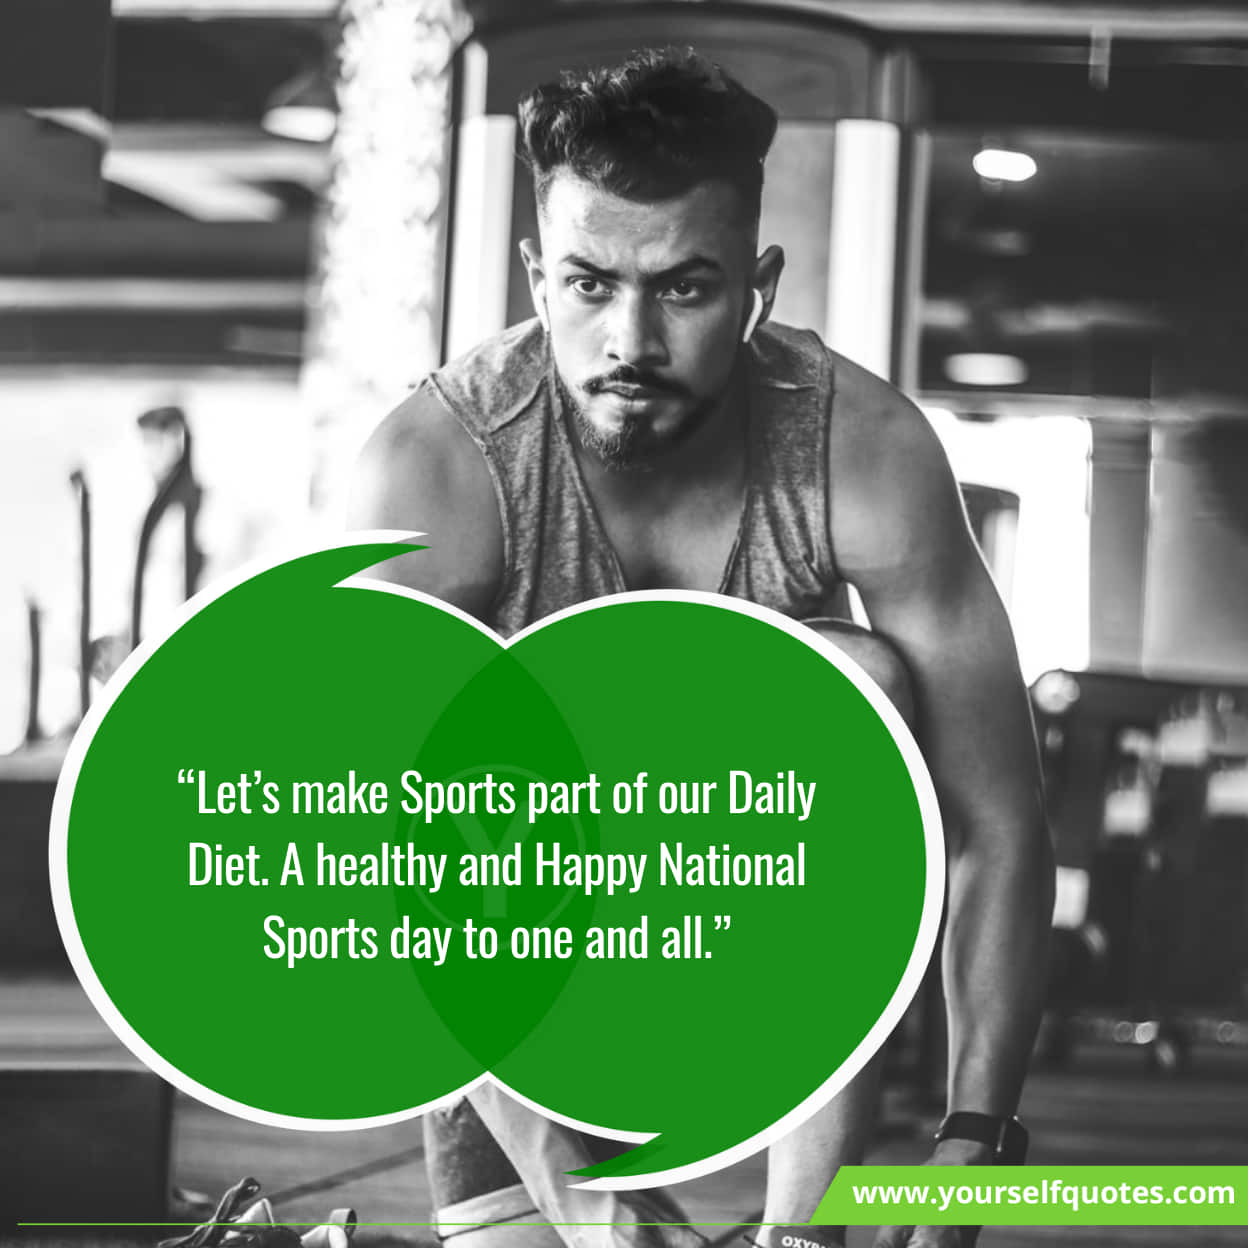 National Sports Day Sayings & Greetings